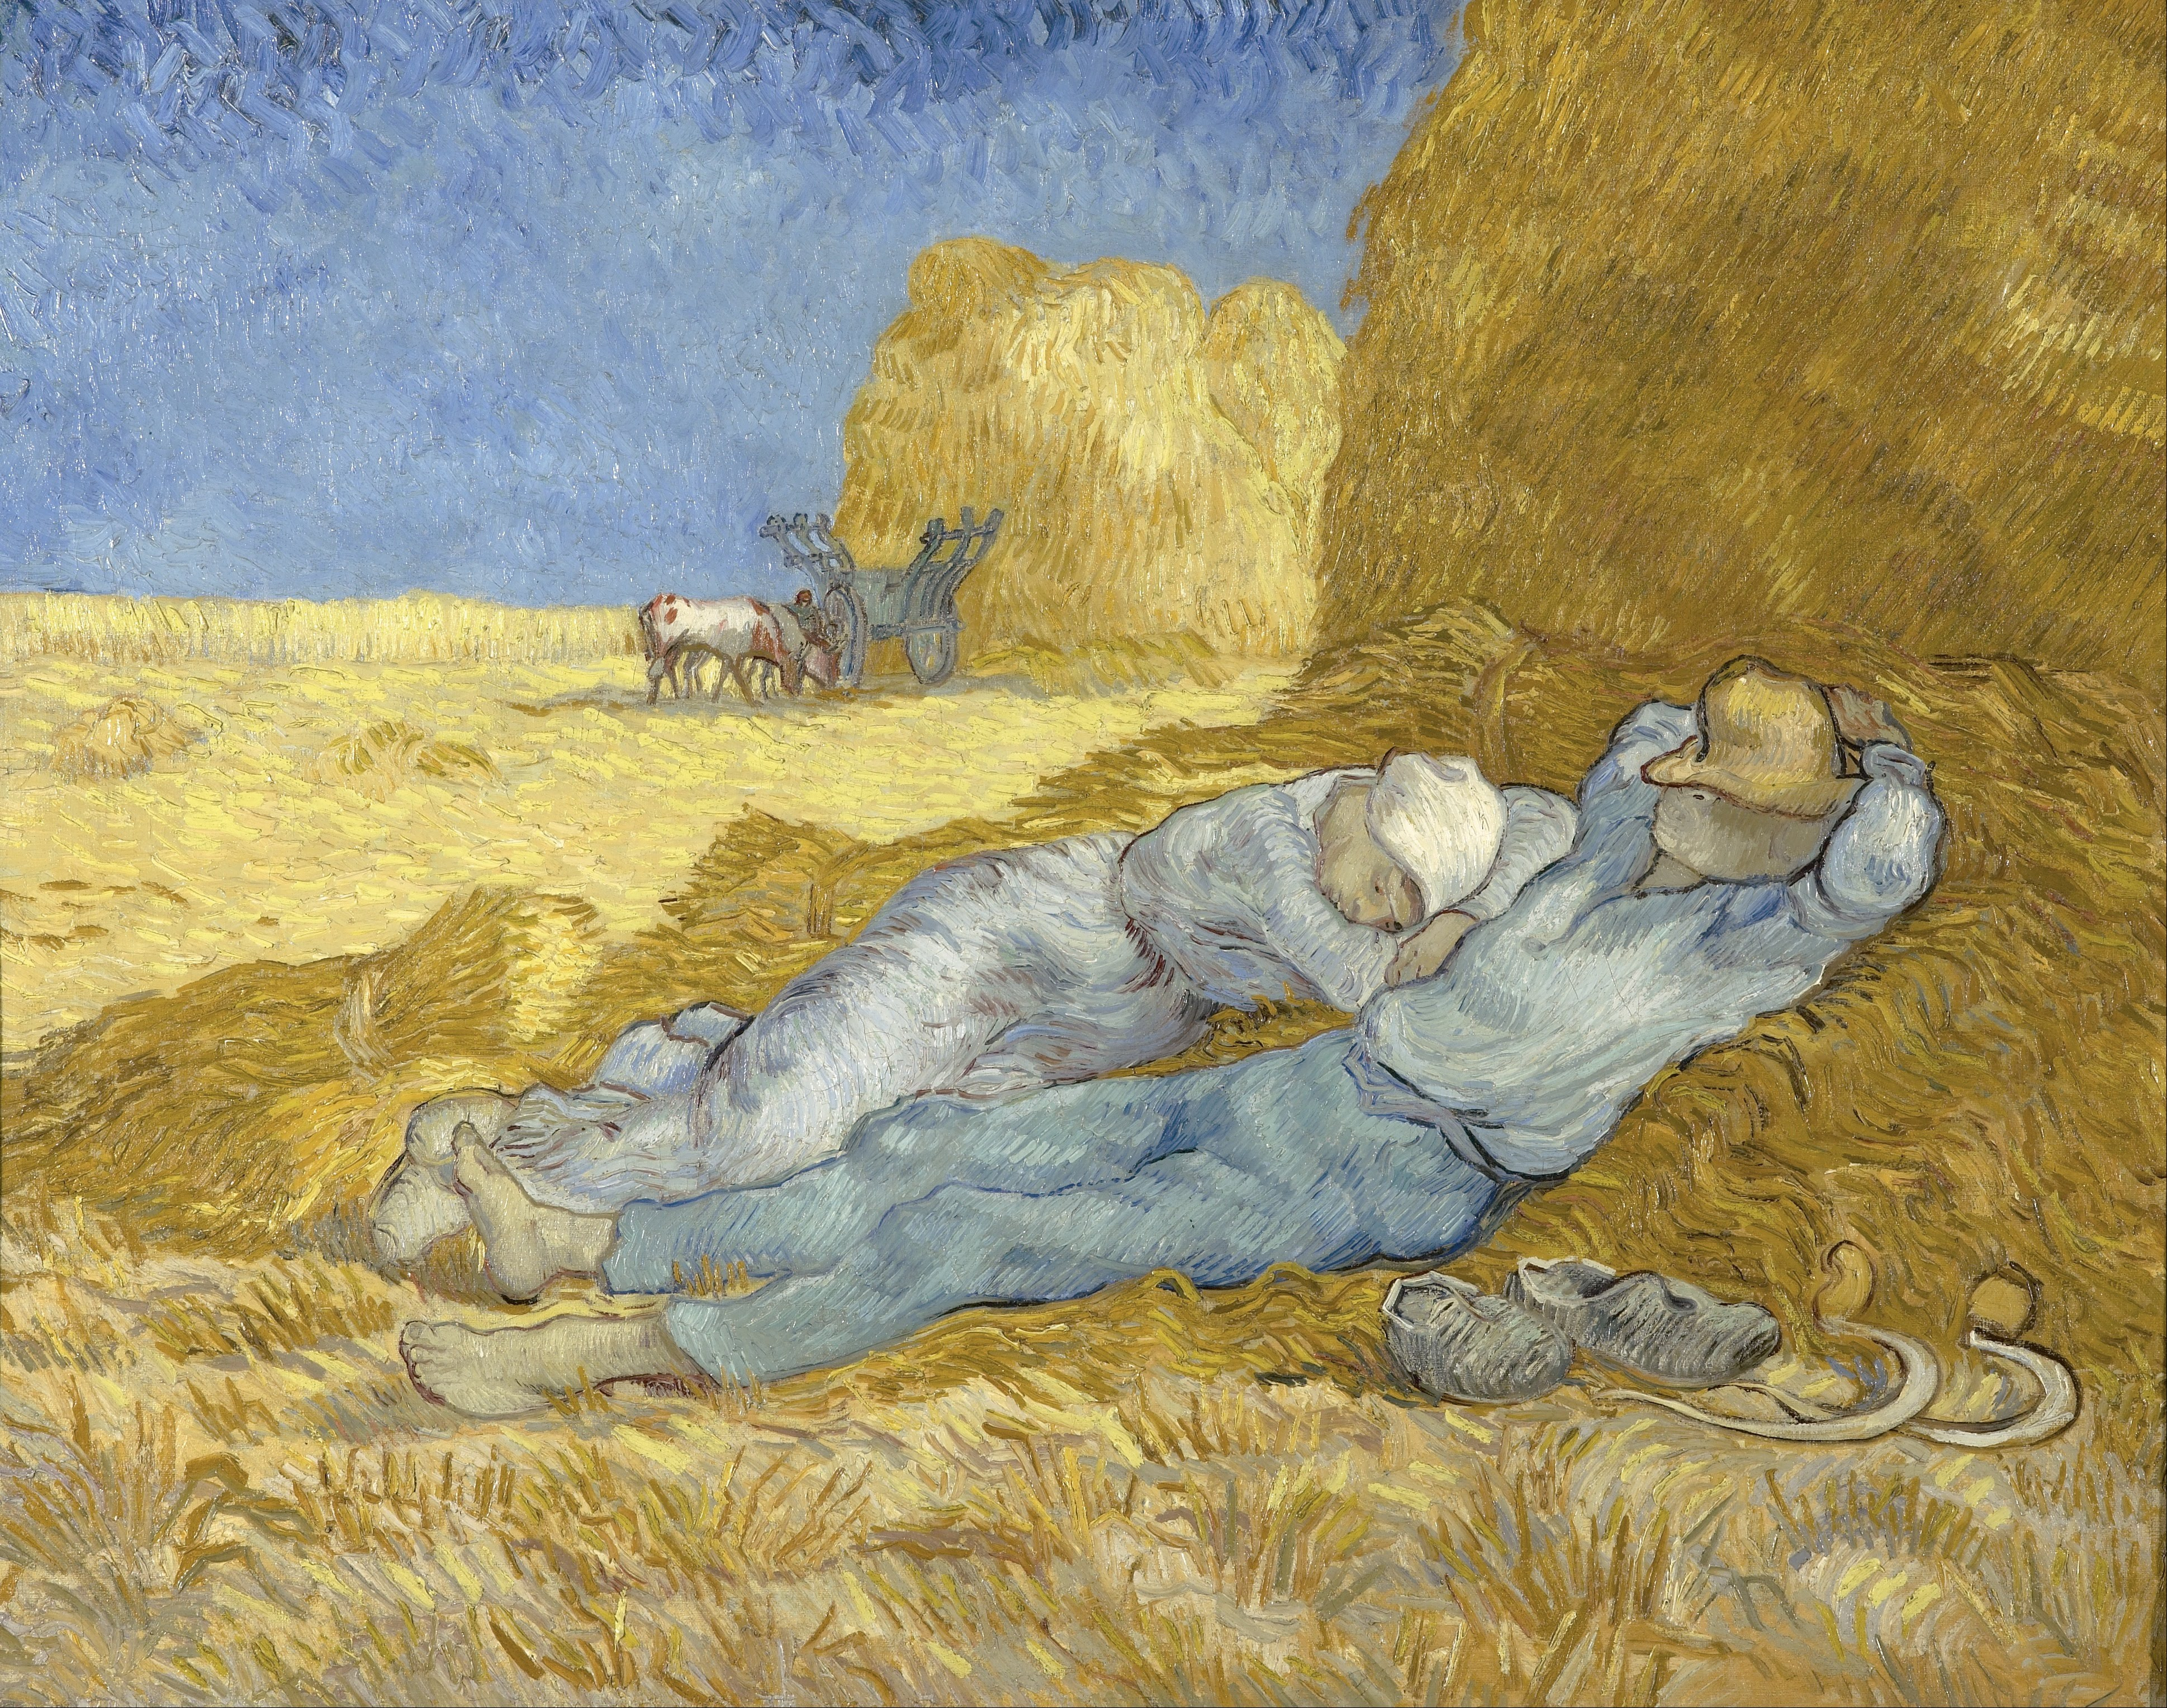 http://upload.wikimedia.org/wikipedia/commons/d/df/Vincent_van_Gogh_-_The_siesta_%28after_Millet%29_-_Google_Art_Project.jpg